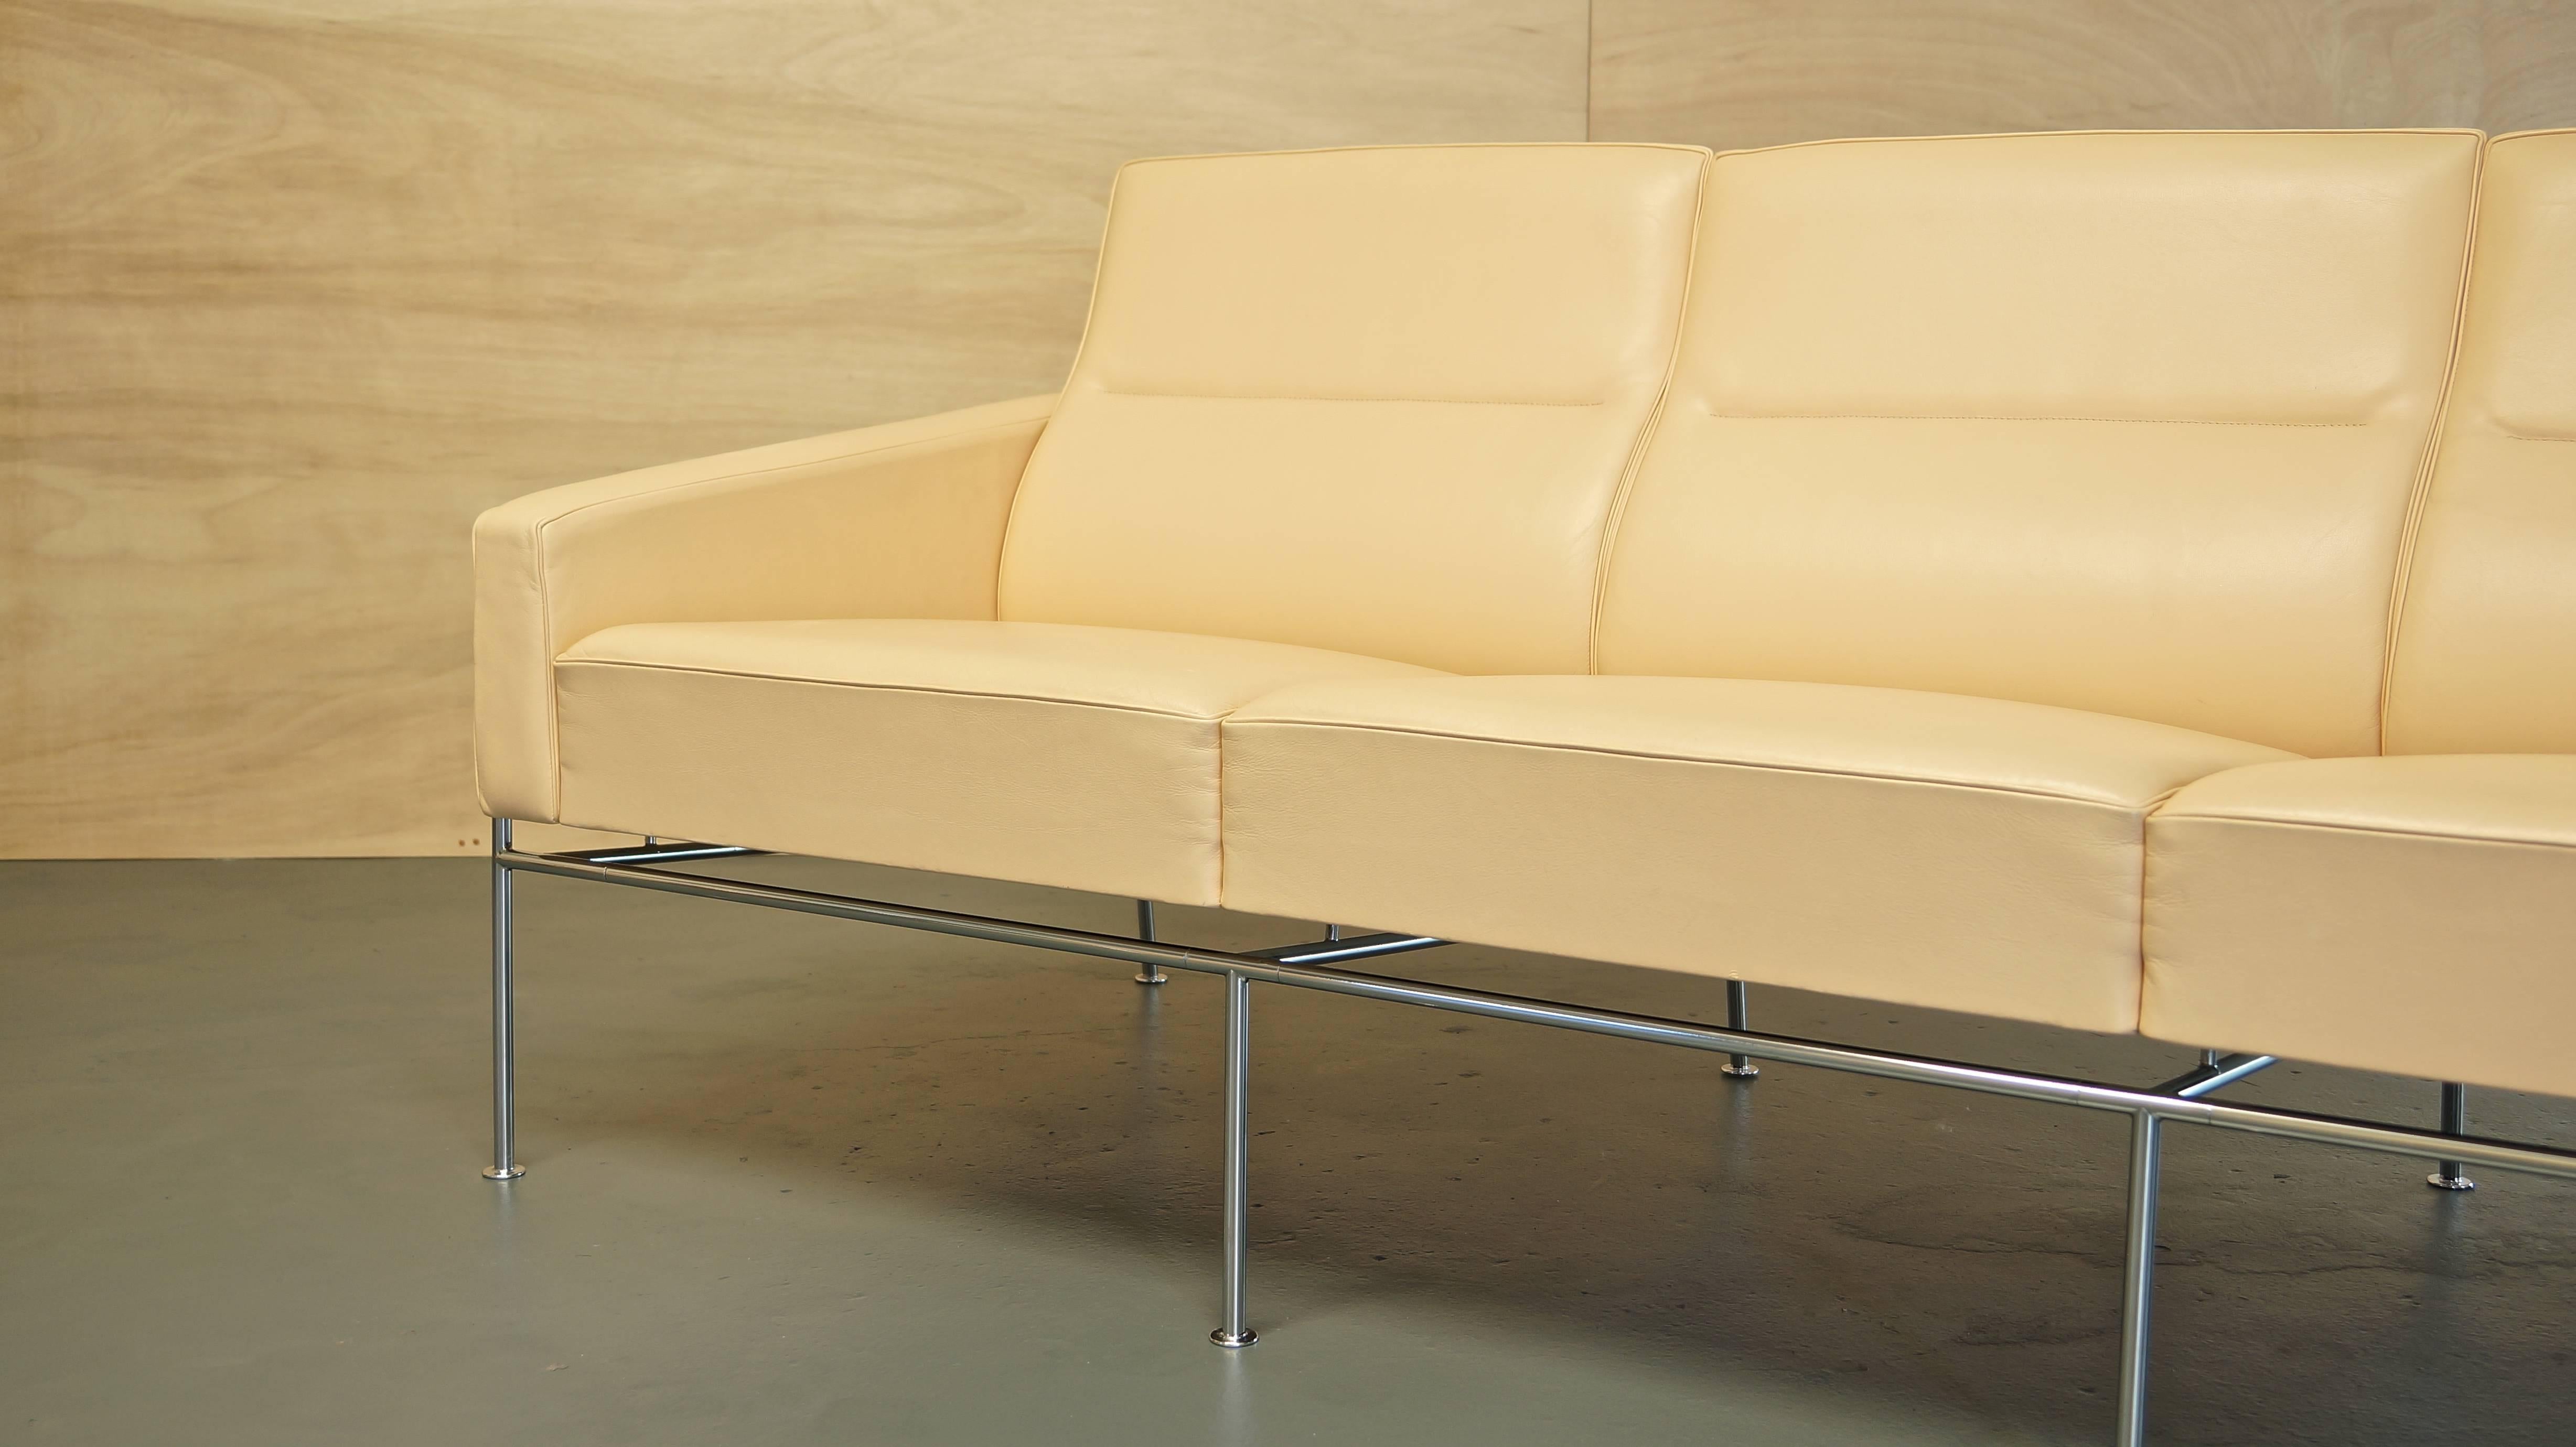 Mid-20th Century Arne Jacobsen 3300 Lounge Suite Three-Seat Sofa & Pair of Leather Lounge Chairs